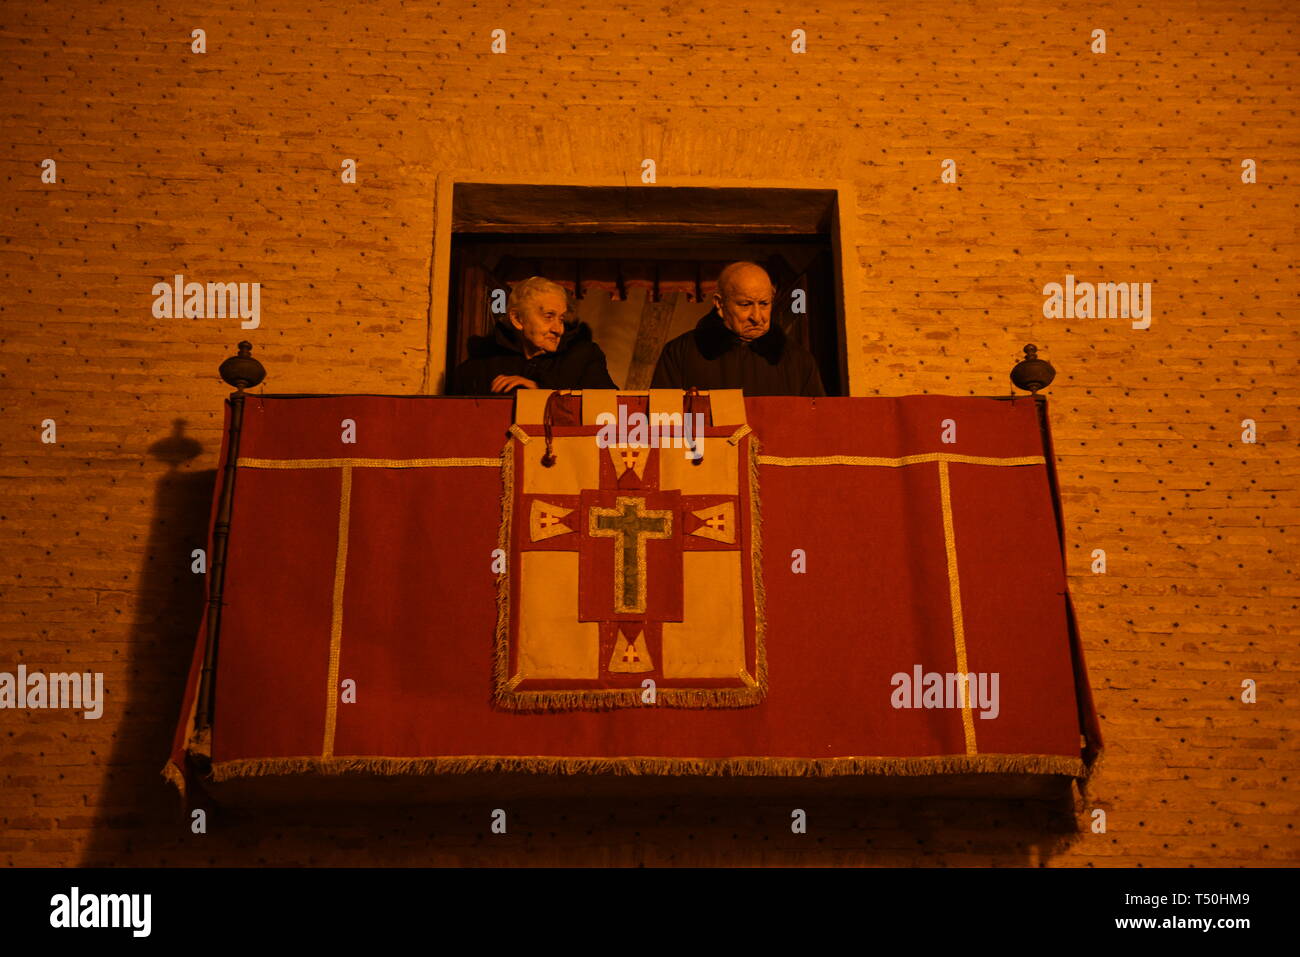 Believers seen watching from a building balcony during the procession of 'Viernes Santo' (Good Friday) in Soria, north of Spain. More than one billion Christian across the world mark the Holy Week of Easter in celebration of the crucifixion and resurrection of Jesus Christ. Stock Photo